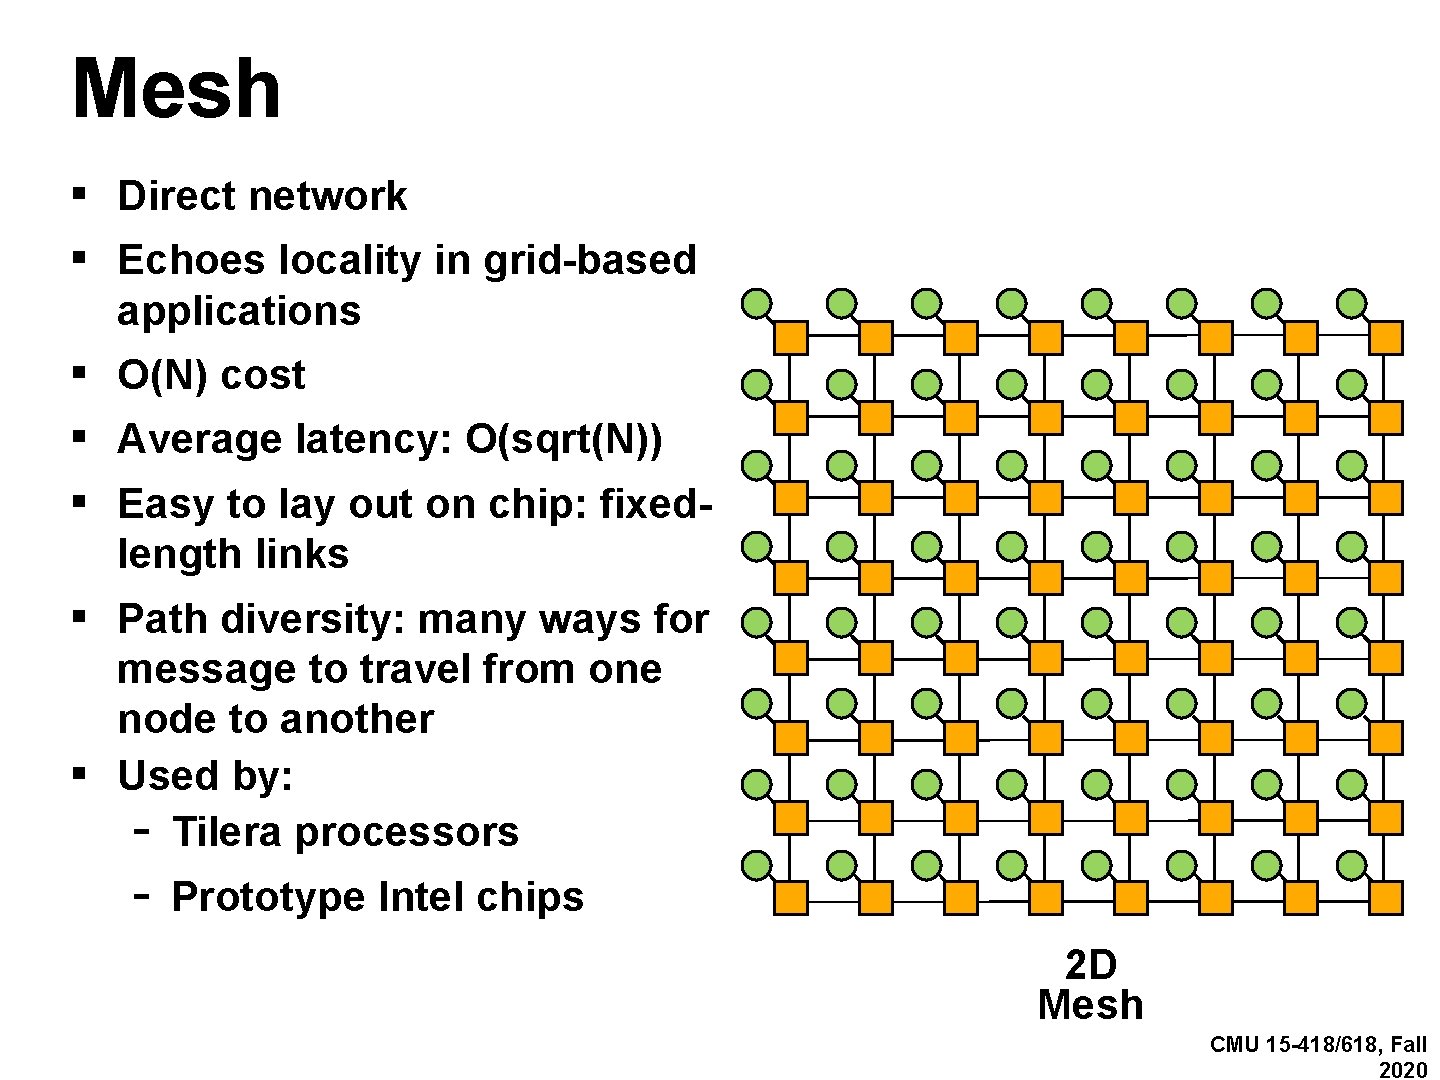 Mesh ▪ Direct network ▪ Echoes locality in grid-based applications ▪ O(N) cost ▪